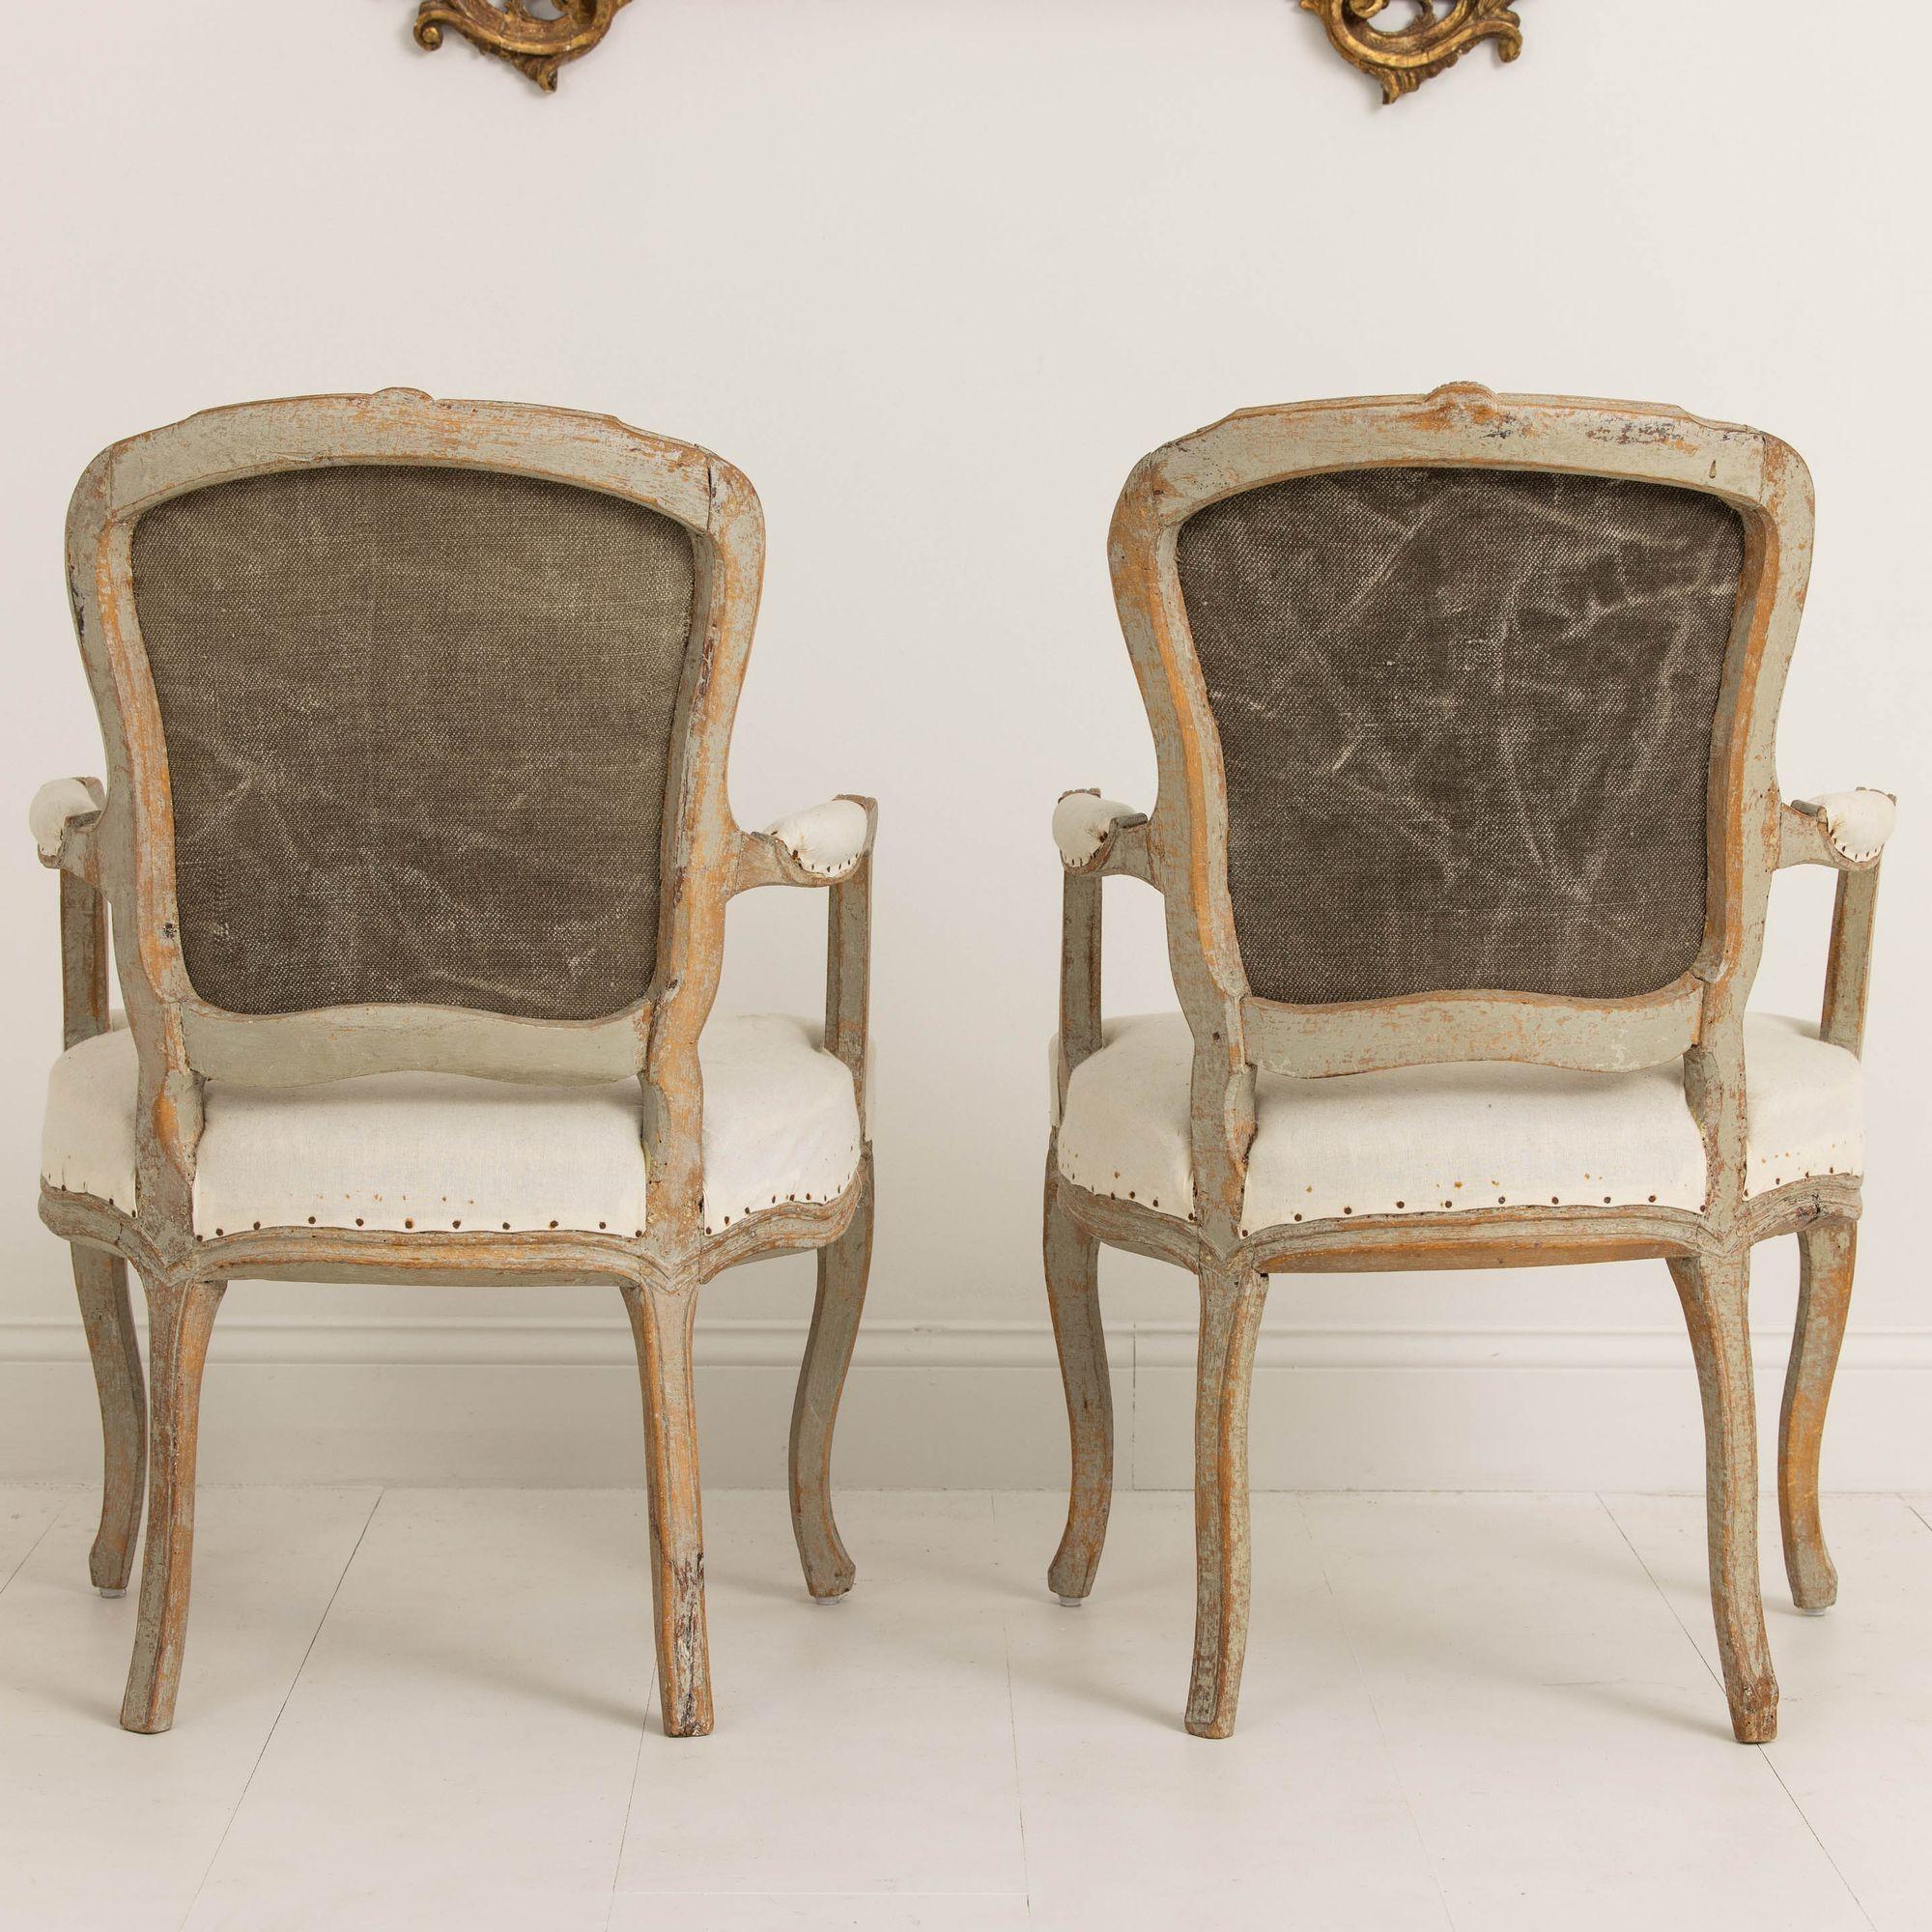 Pair of 18th c. Swedish Rococo Period Armchairs in Original Paint  For Sale 9